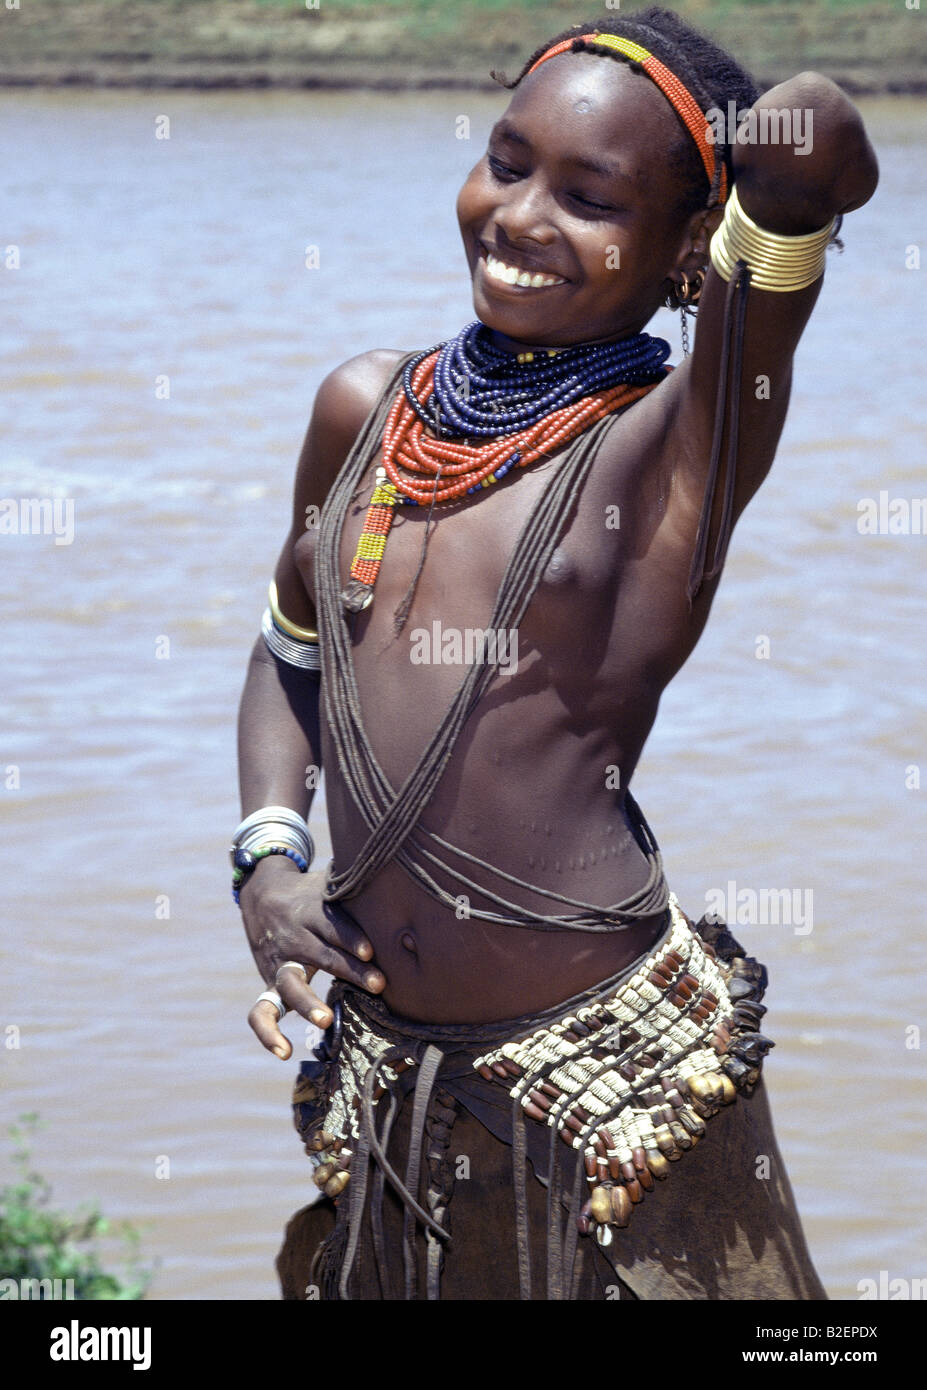 A young Dassanech girl beside the Omo River.  Her hairstyle, necklaces and metal armbands are typical of her tribe. Stock Photo